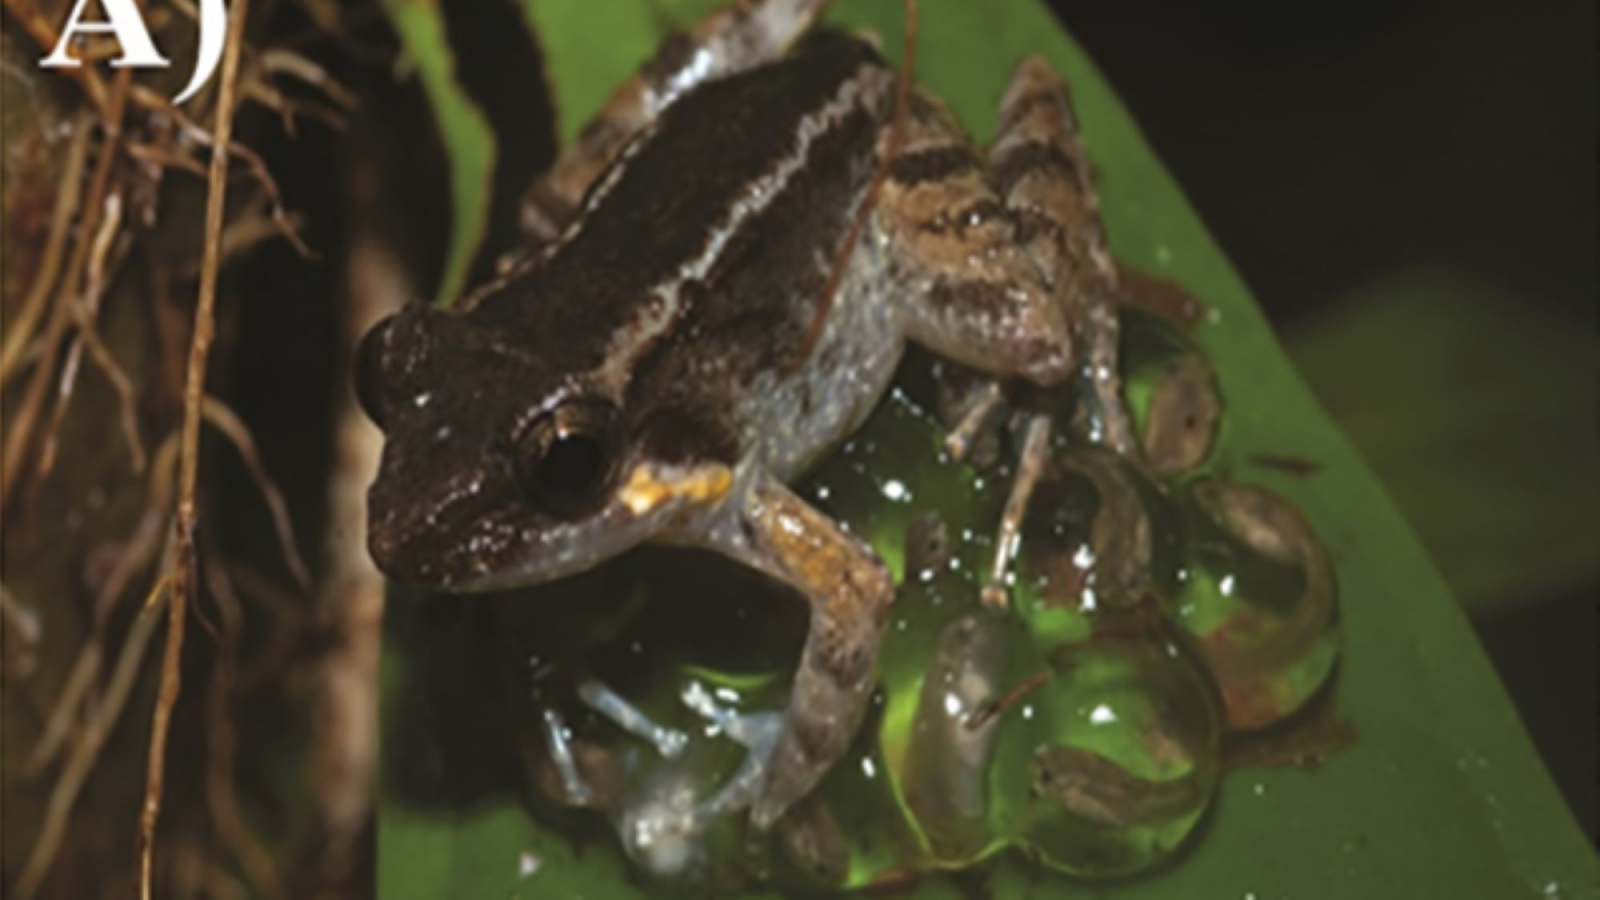 This tiny 'leaf-nester' is the smallest known fanged frog